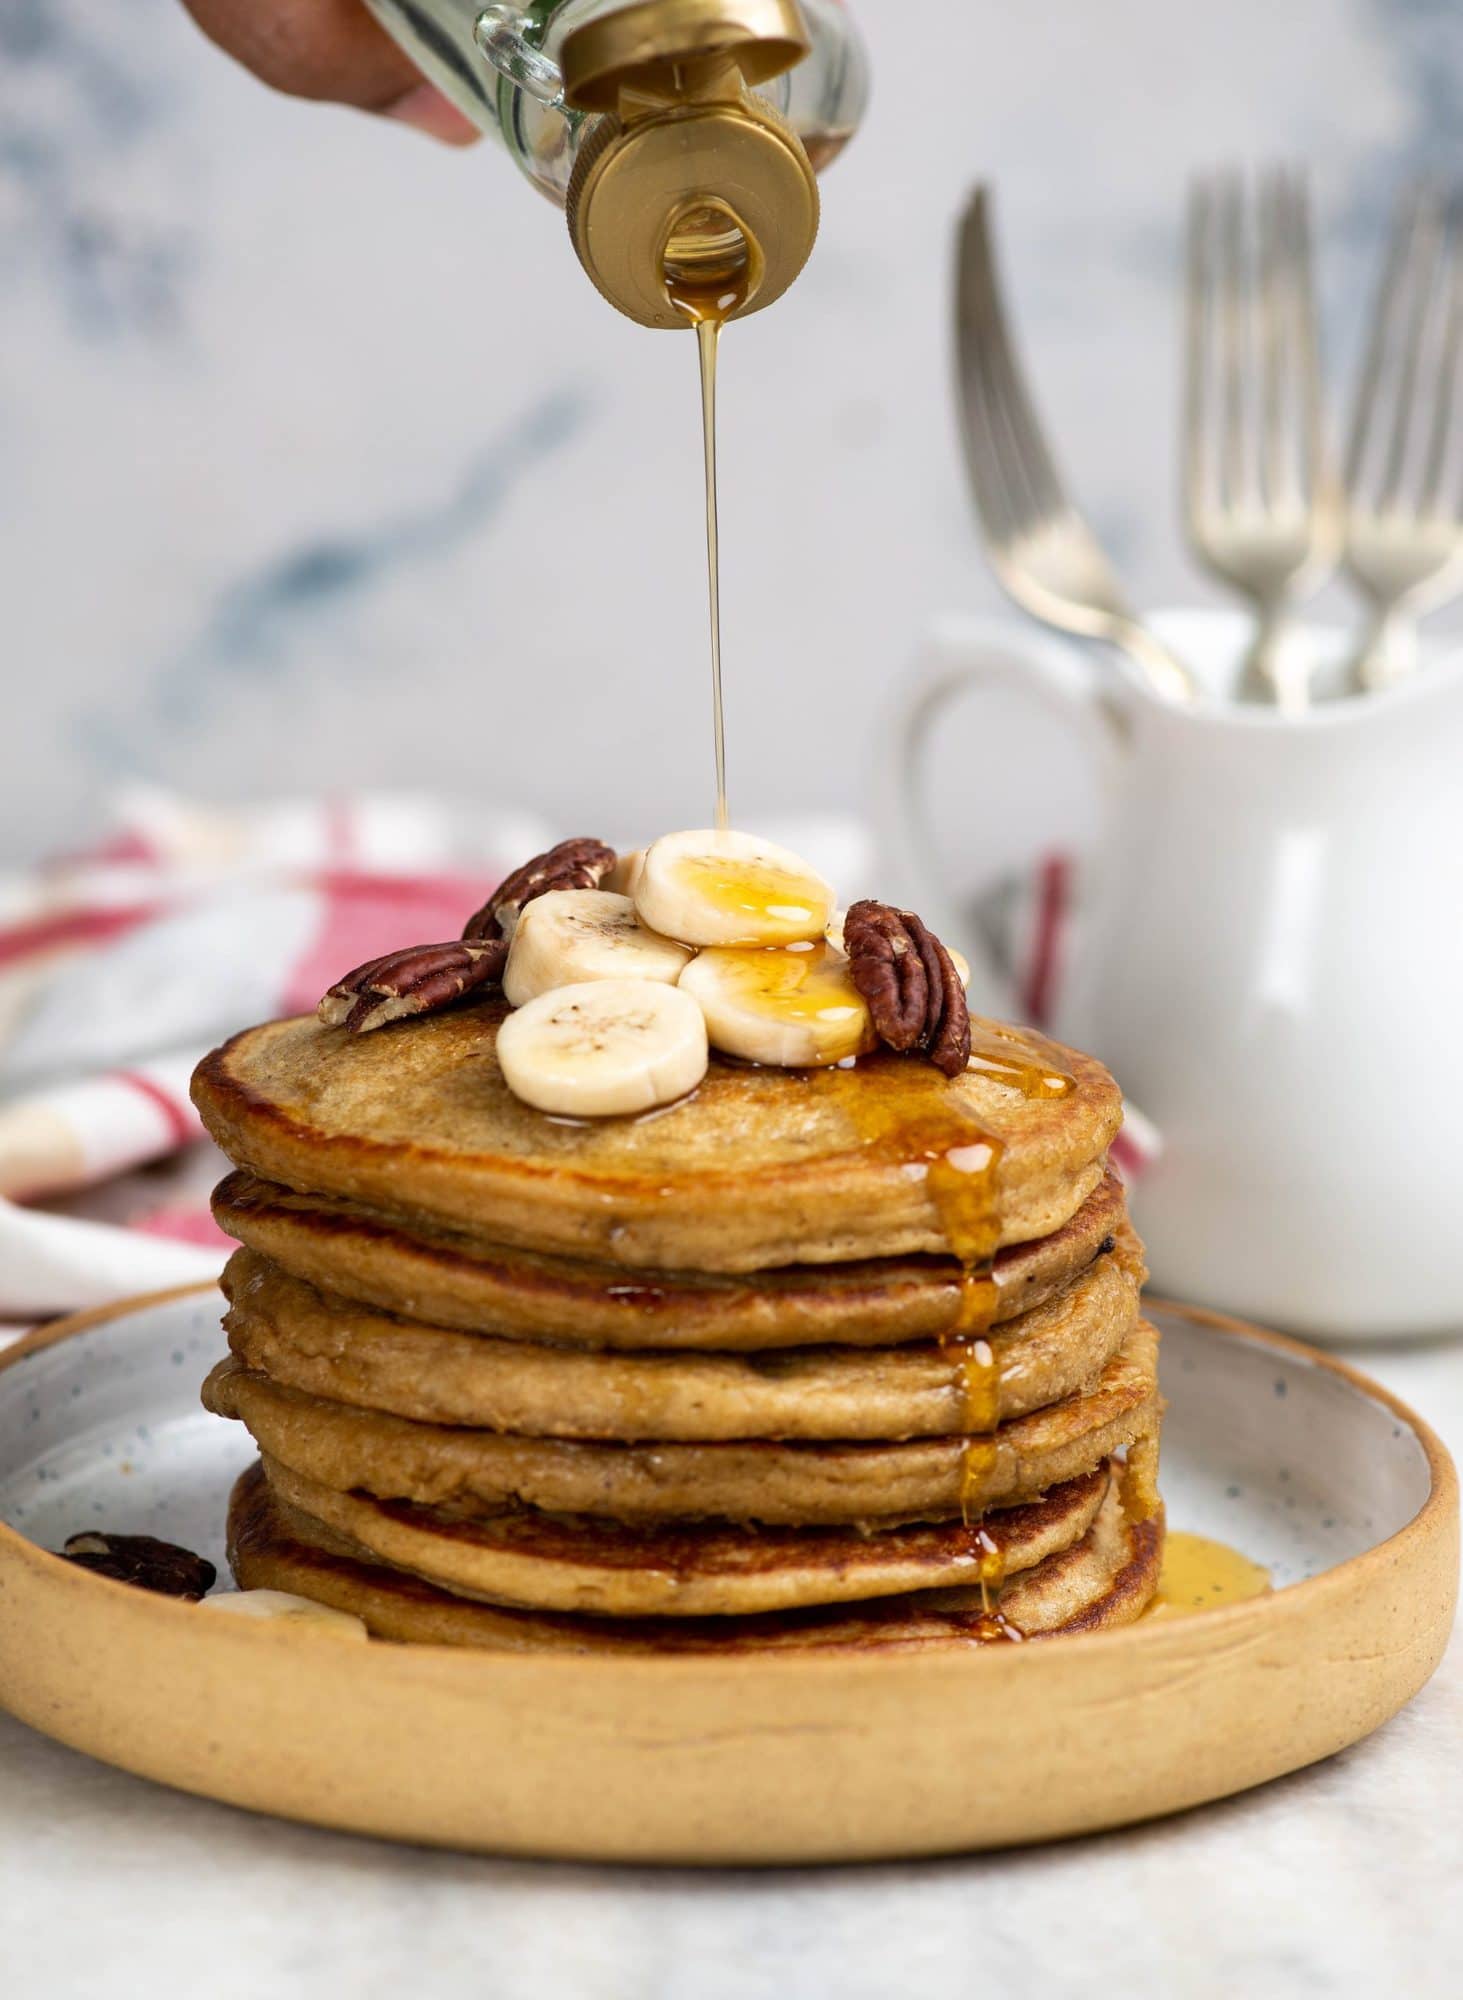 These Banana Oatmeal Pancakes are made up of whole grain(no flour), gluten-free, and really quick to make. You literally add all the ingredients to a blender and the batter is ready in 5 minutes. 
